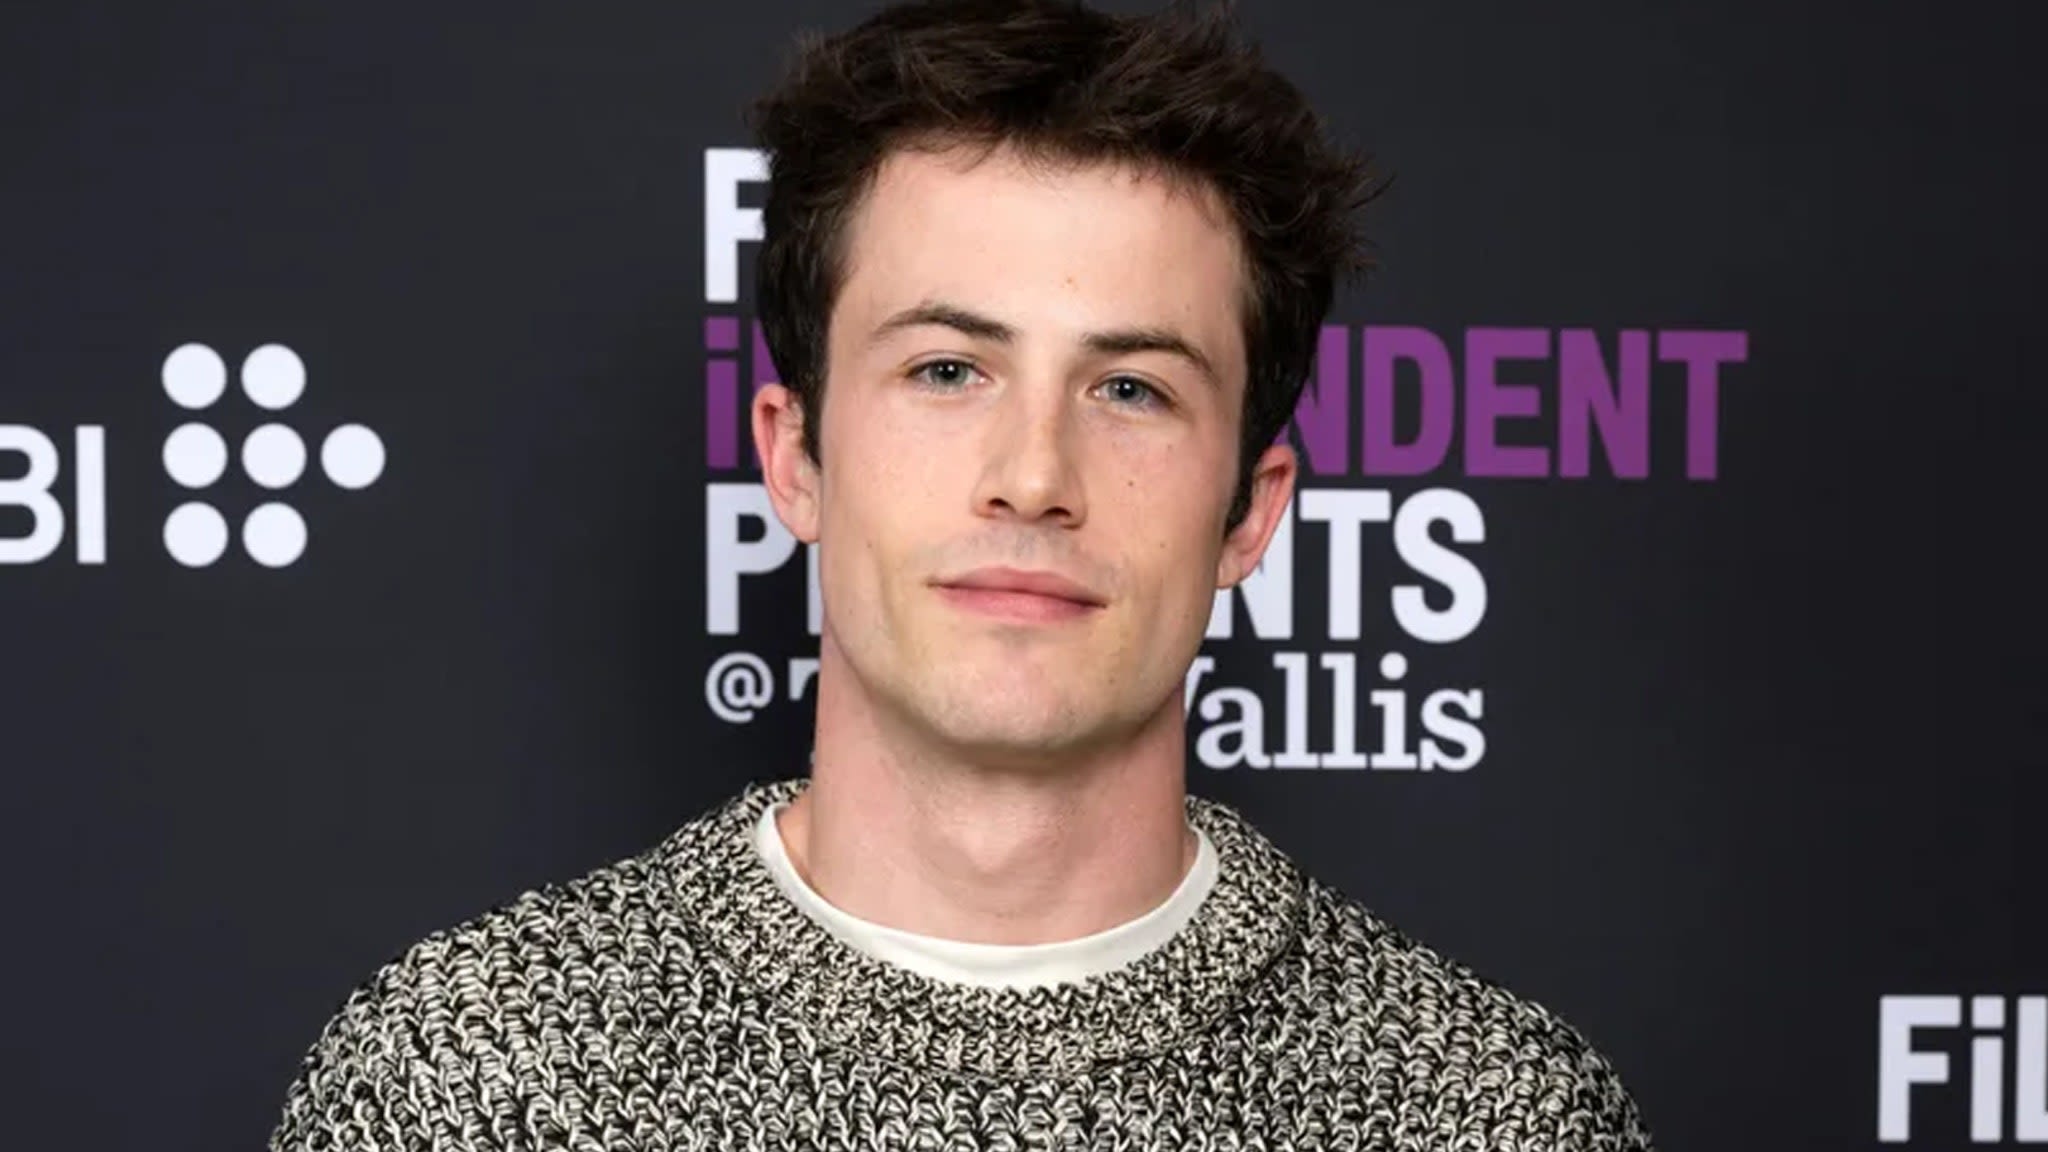 13 Reasons Why's Dylan Minnette Reveals What Made Him Quit Acting -- And What He's Doing Instead